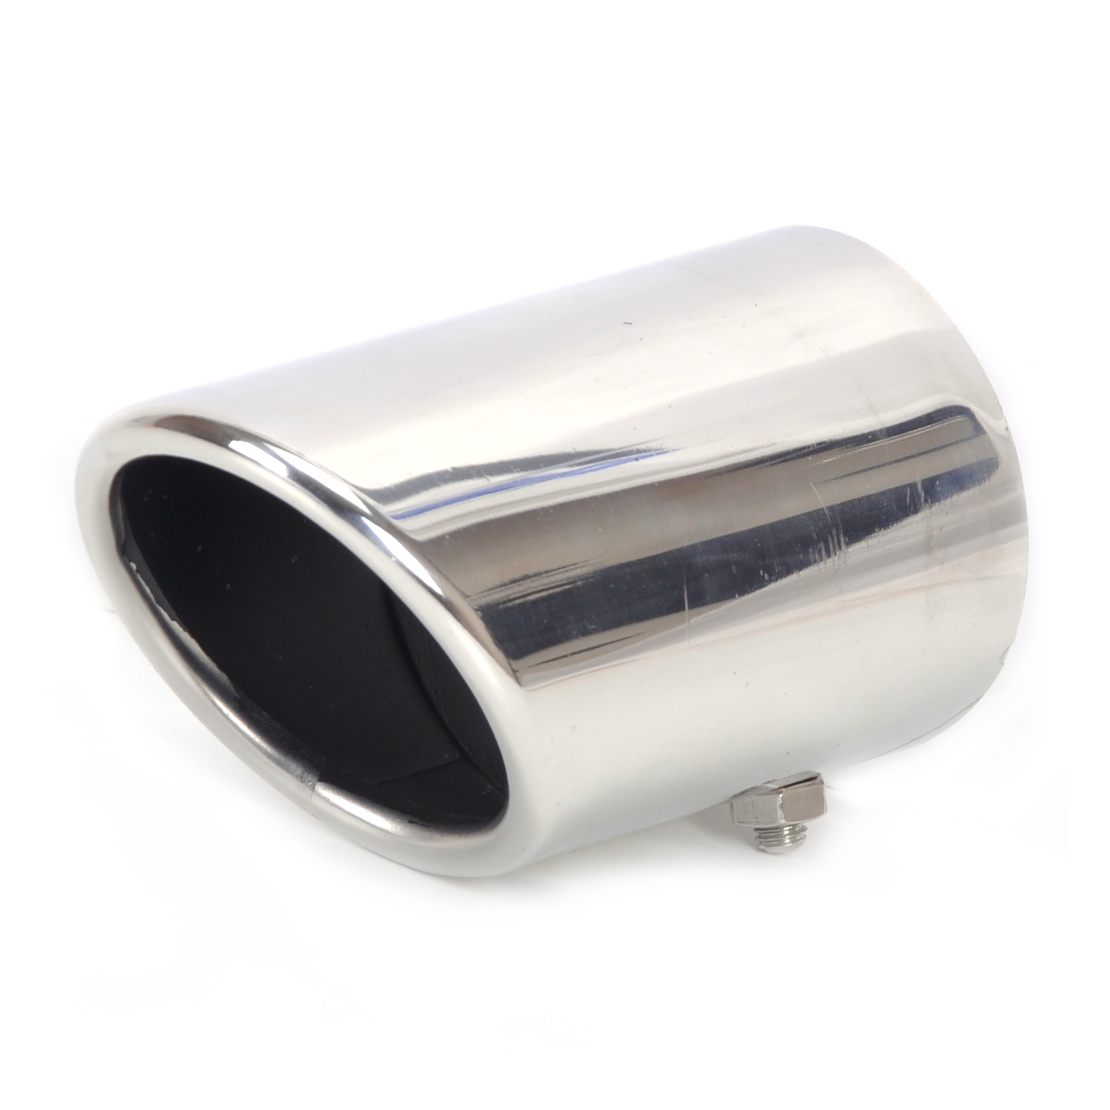 All New Stainless Steel Exhaust Muffler Tip Tail Fit for Toyota Rav4 ...